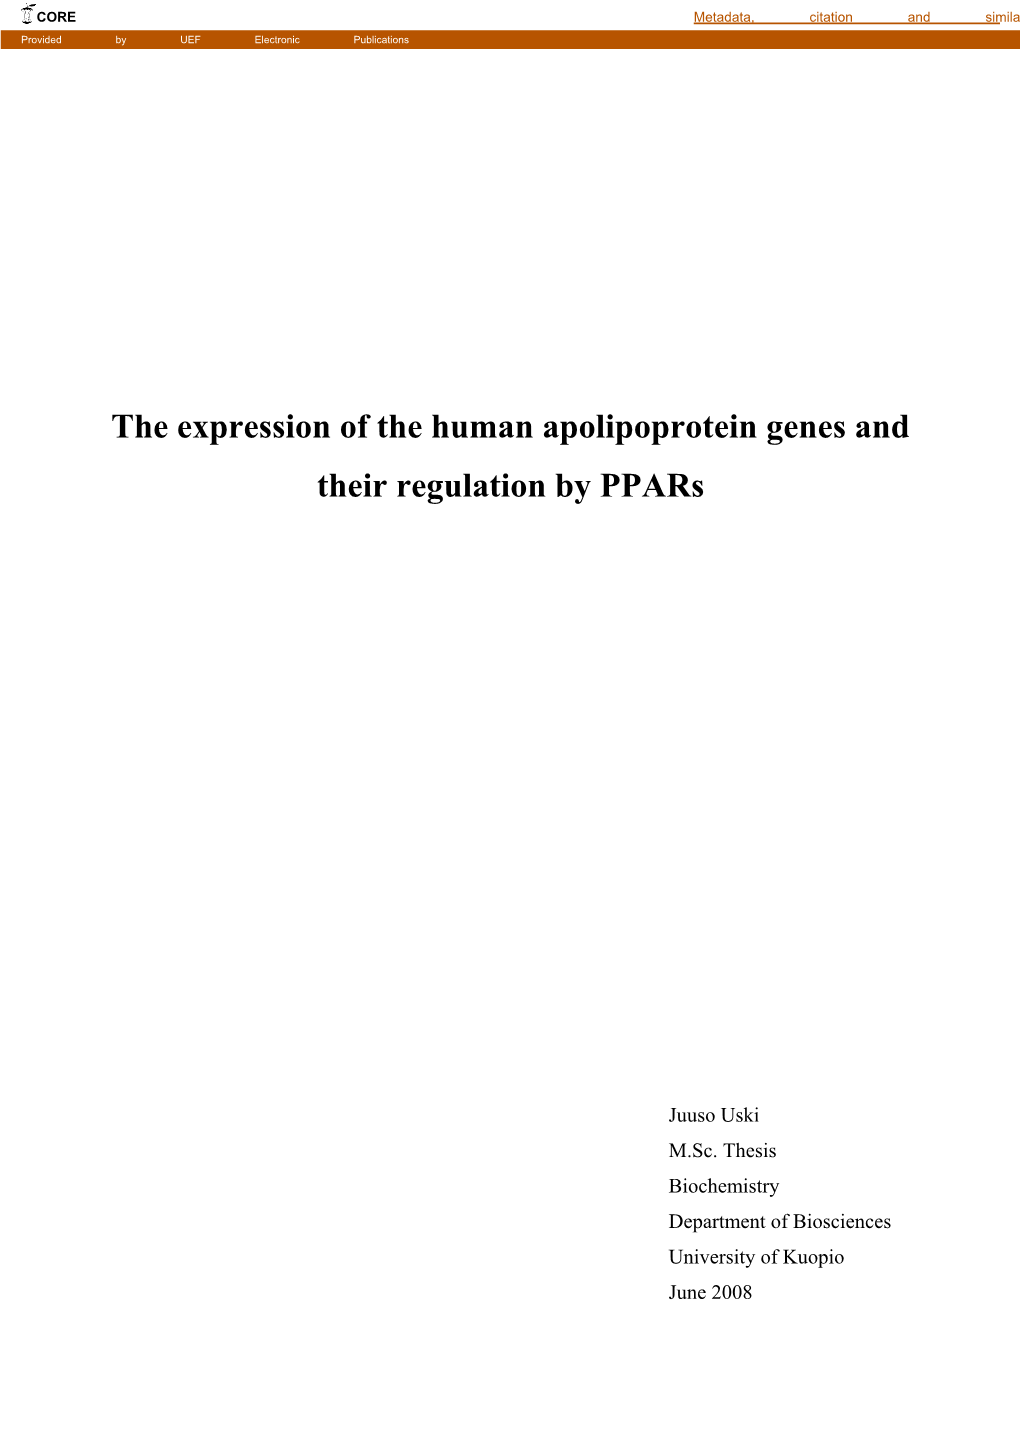 The Expression of the Human Apolipoprotein Genes and Their Regulation by Ppars